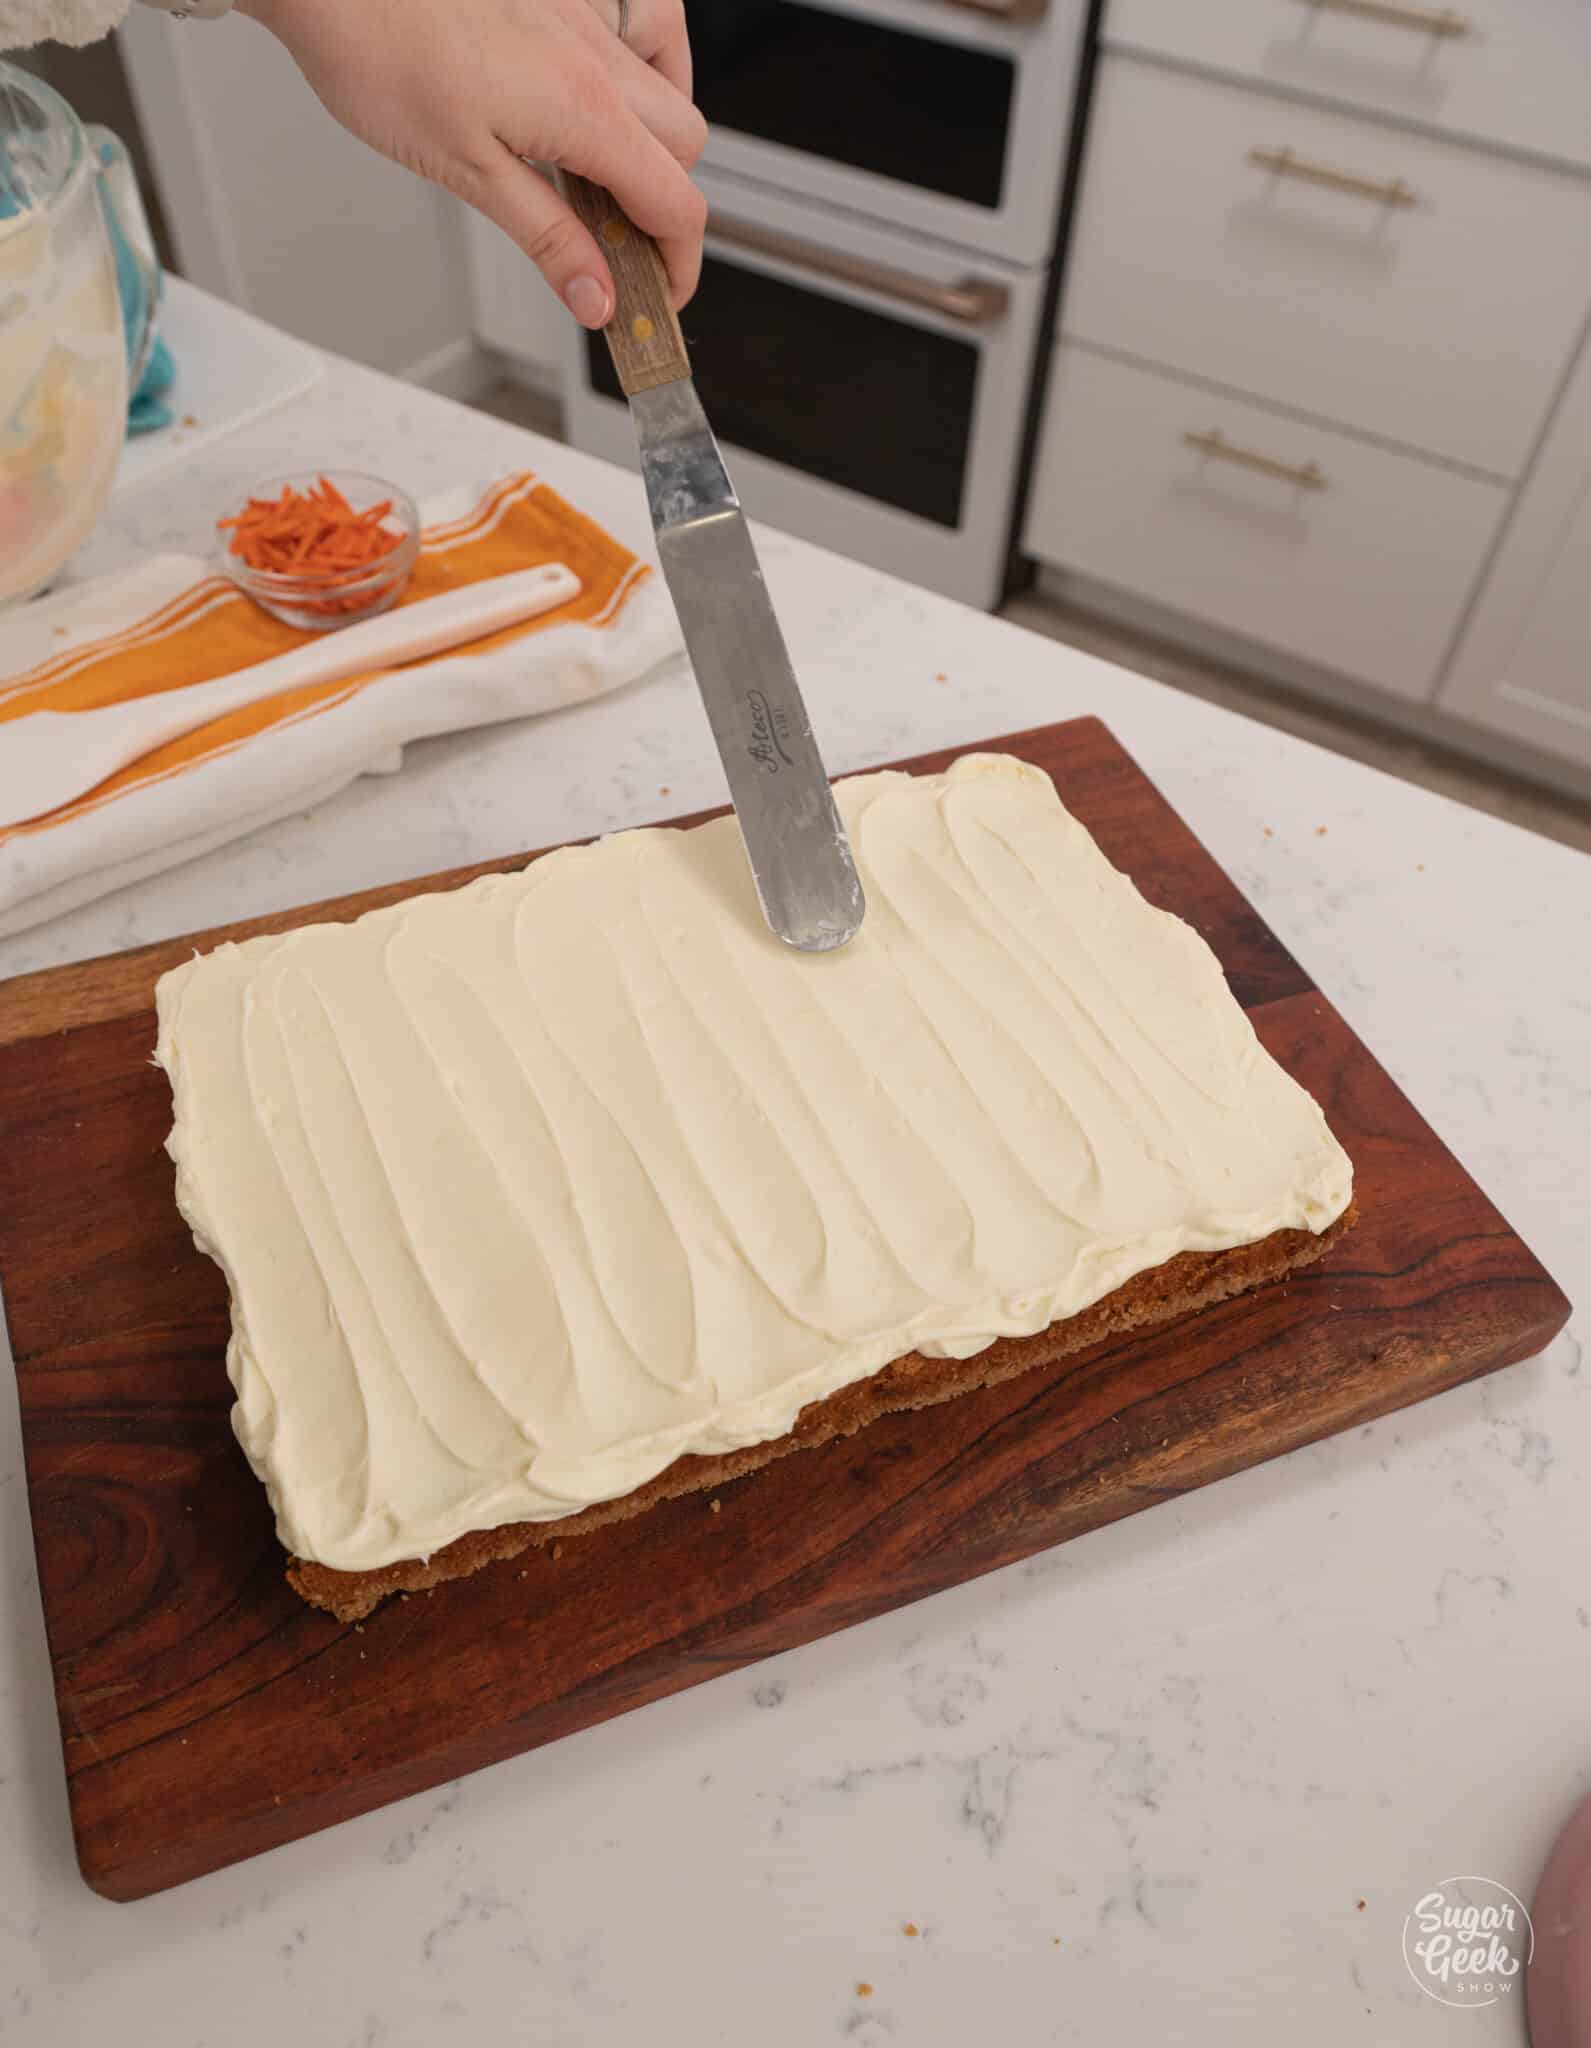 Carrot cake frosted in cream cheese frosting